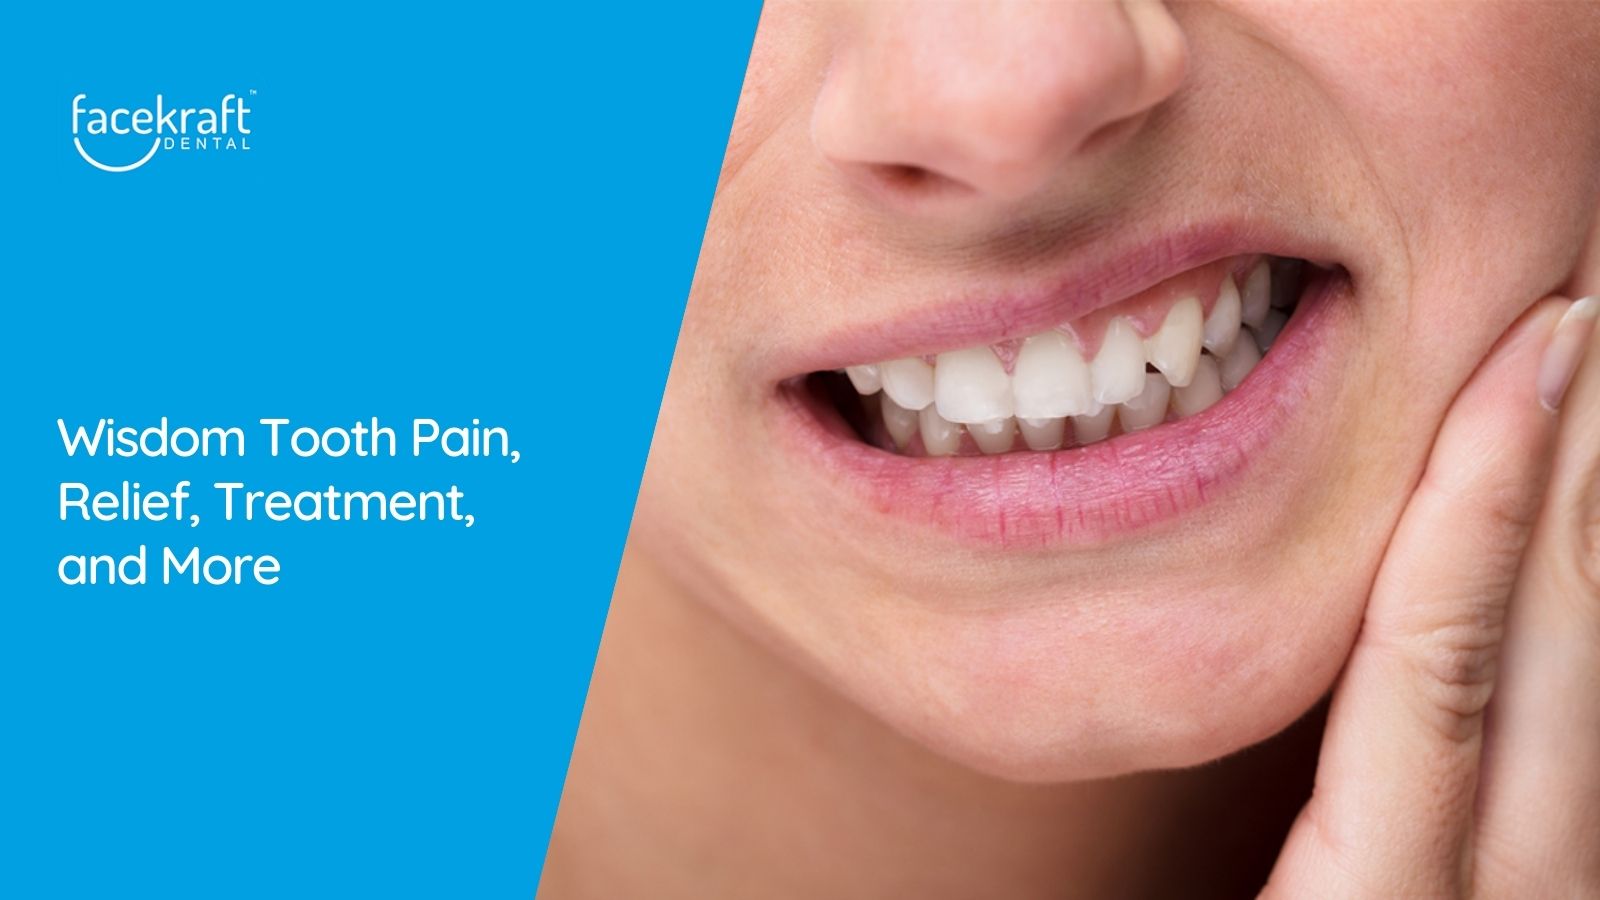 Wisdom Tooth Pain, Relief, Treatment, and More